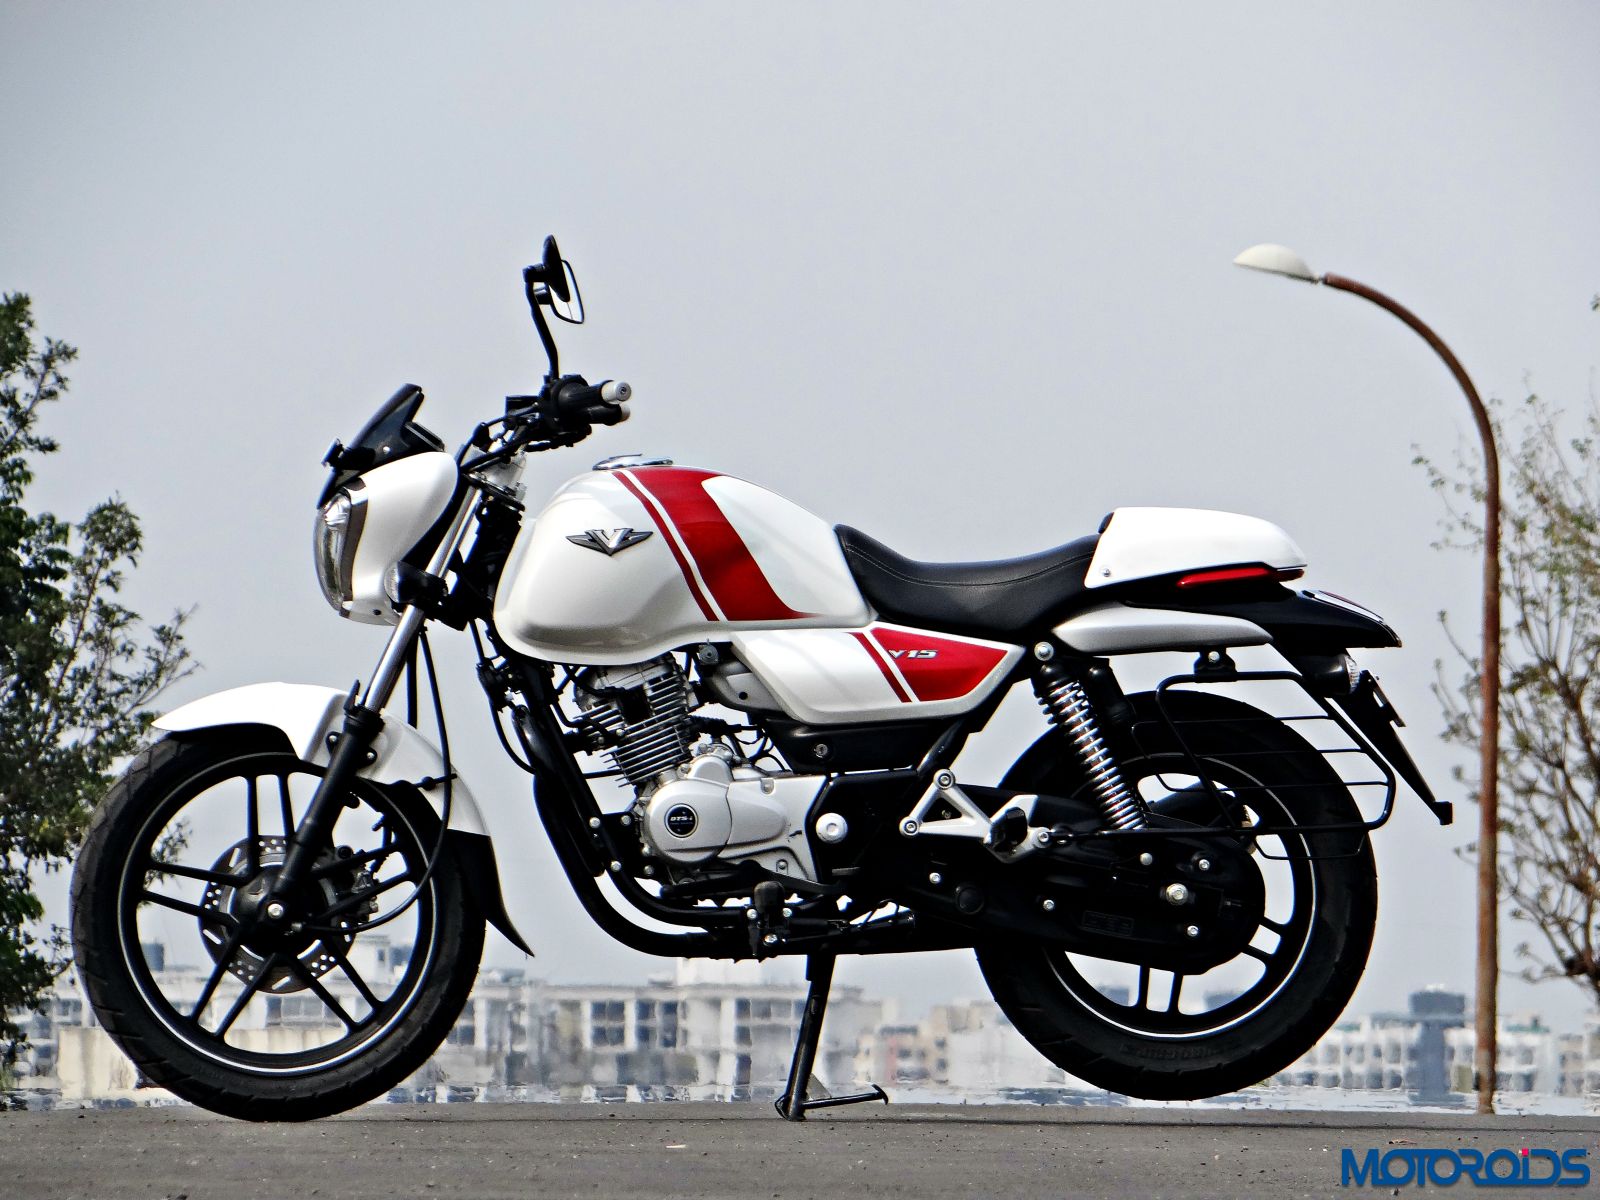 Bajaj V12 To Be Priced At Inr 56 200 Launch Scheduled In December